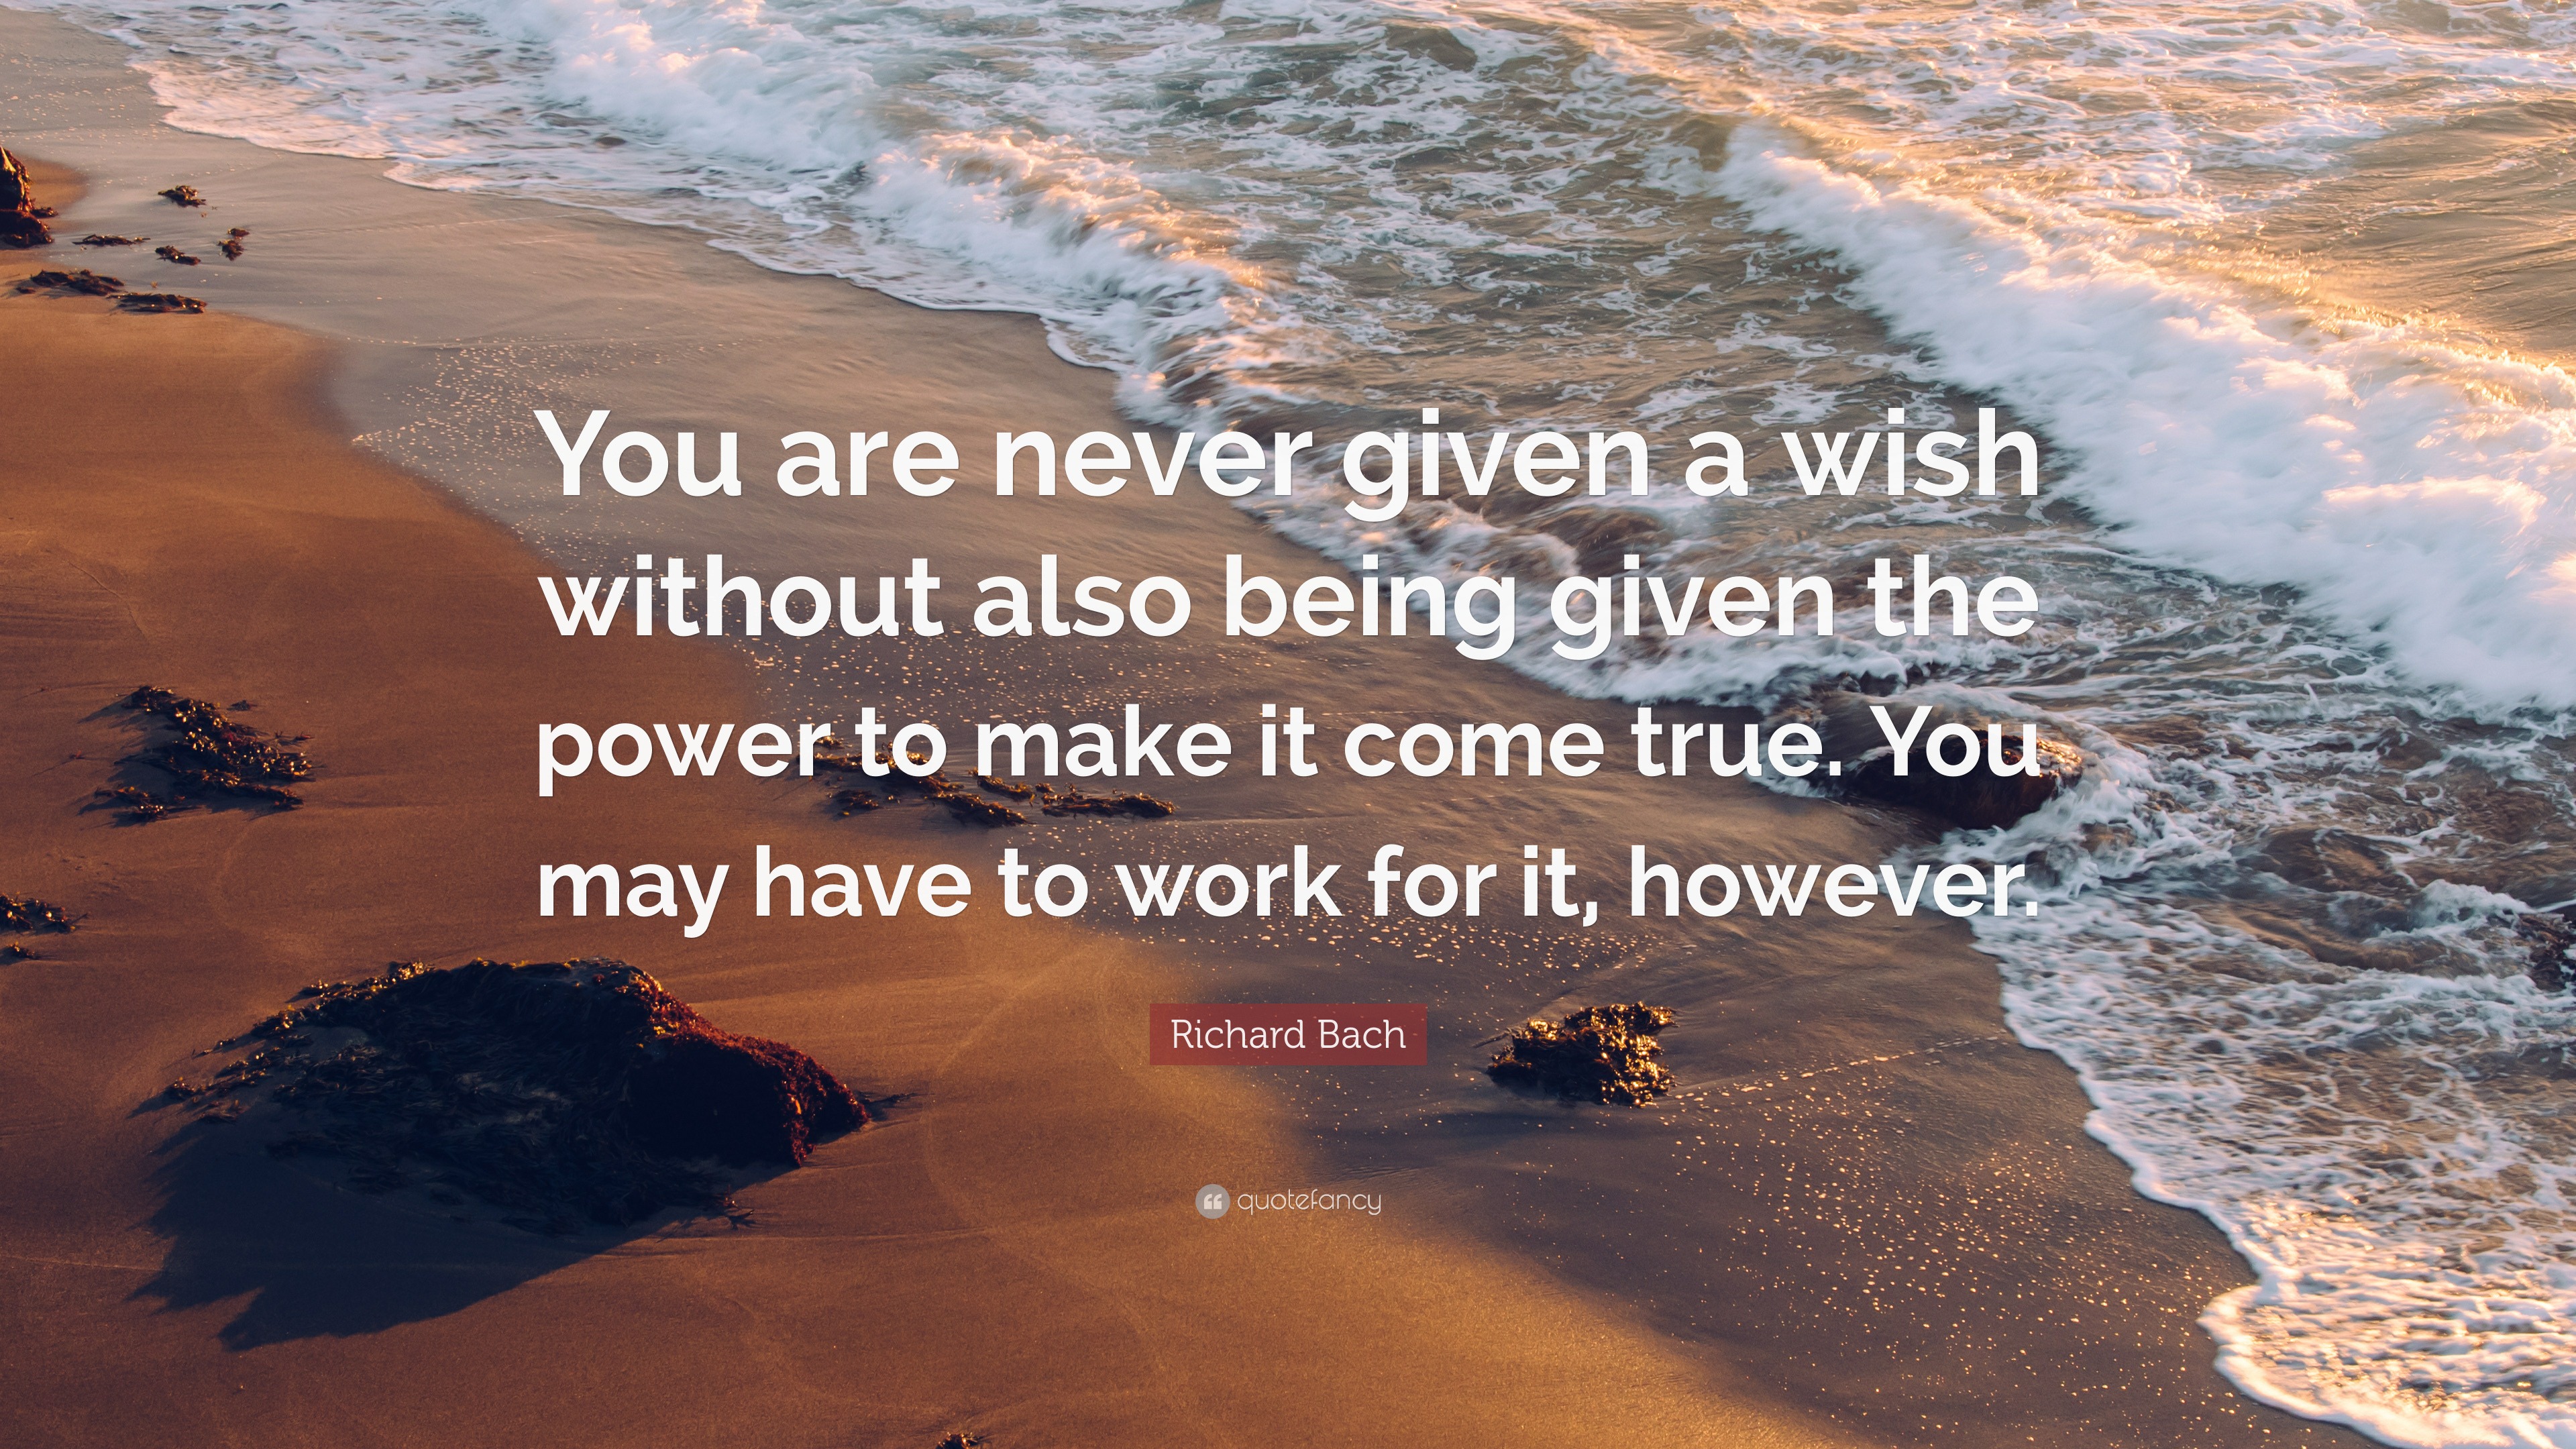 Richard Bach Quote “You are never given a wish without also being